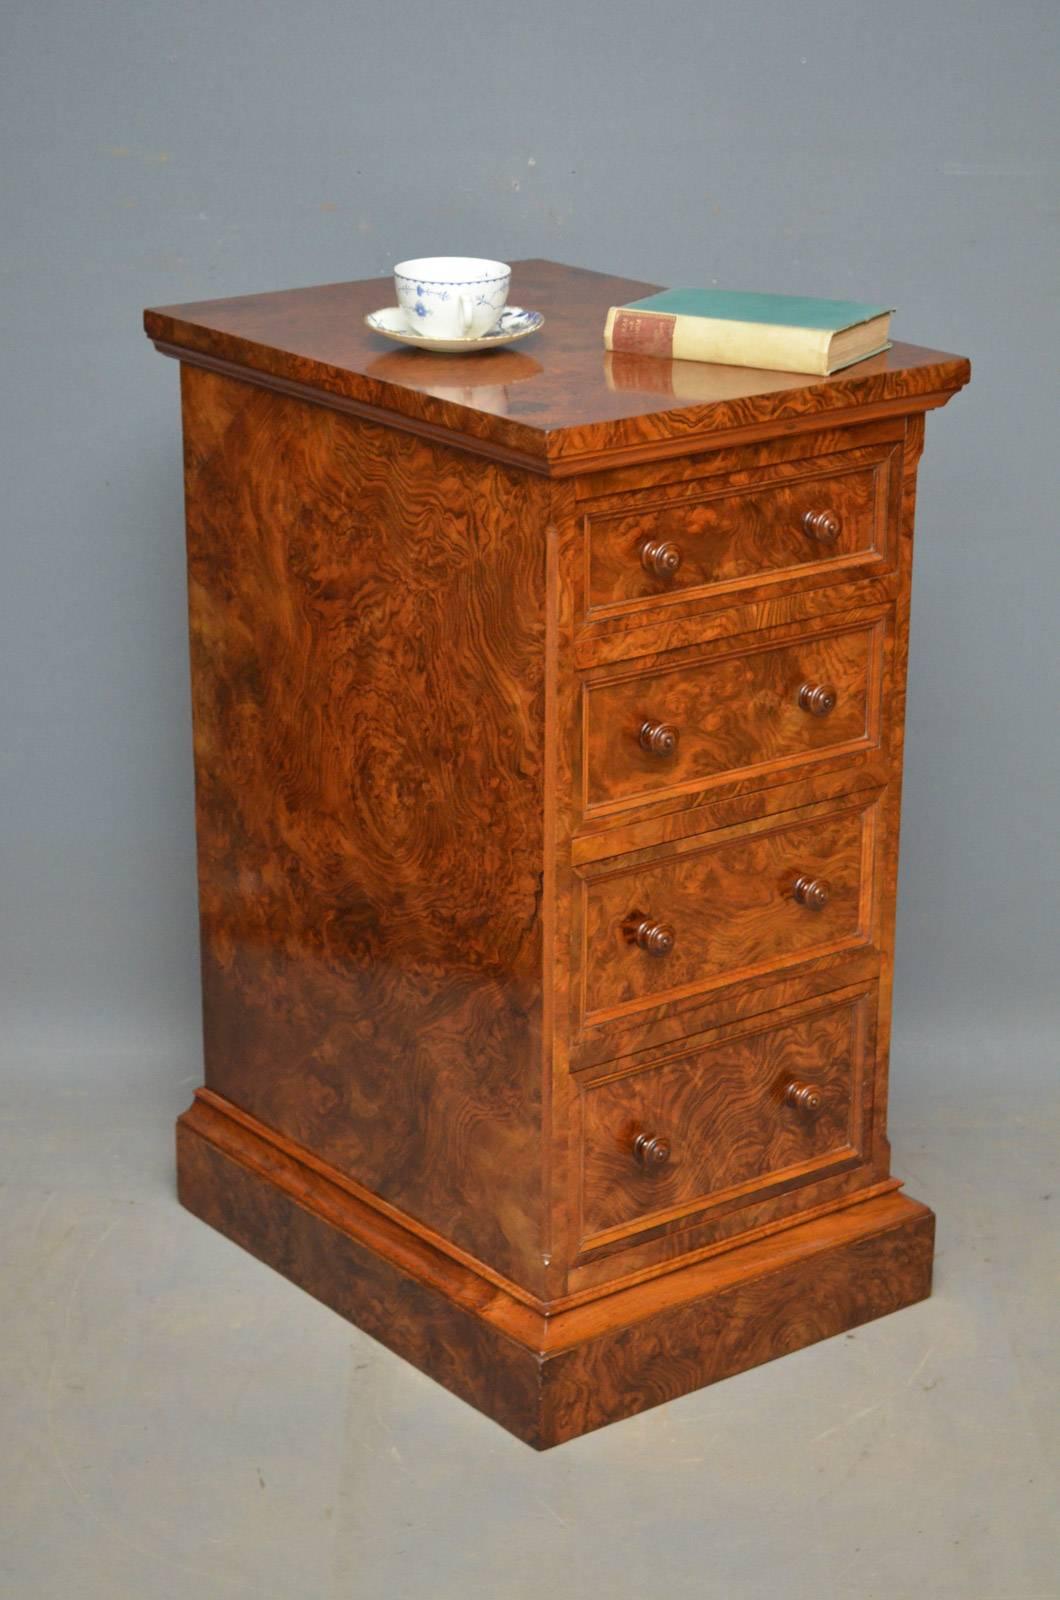 Sn4171, Victorian burr walnut chest of drawers, having moulded top above four moulded and mahogany lined drawers, all fitted with original turned knobs, standing on plinth base. This antique chest of drawers would make a good bedside cabinet, all in